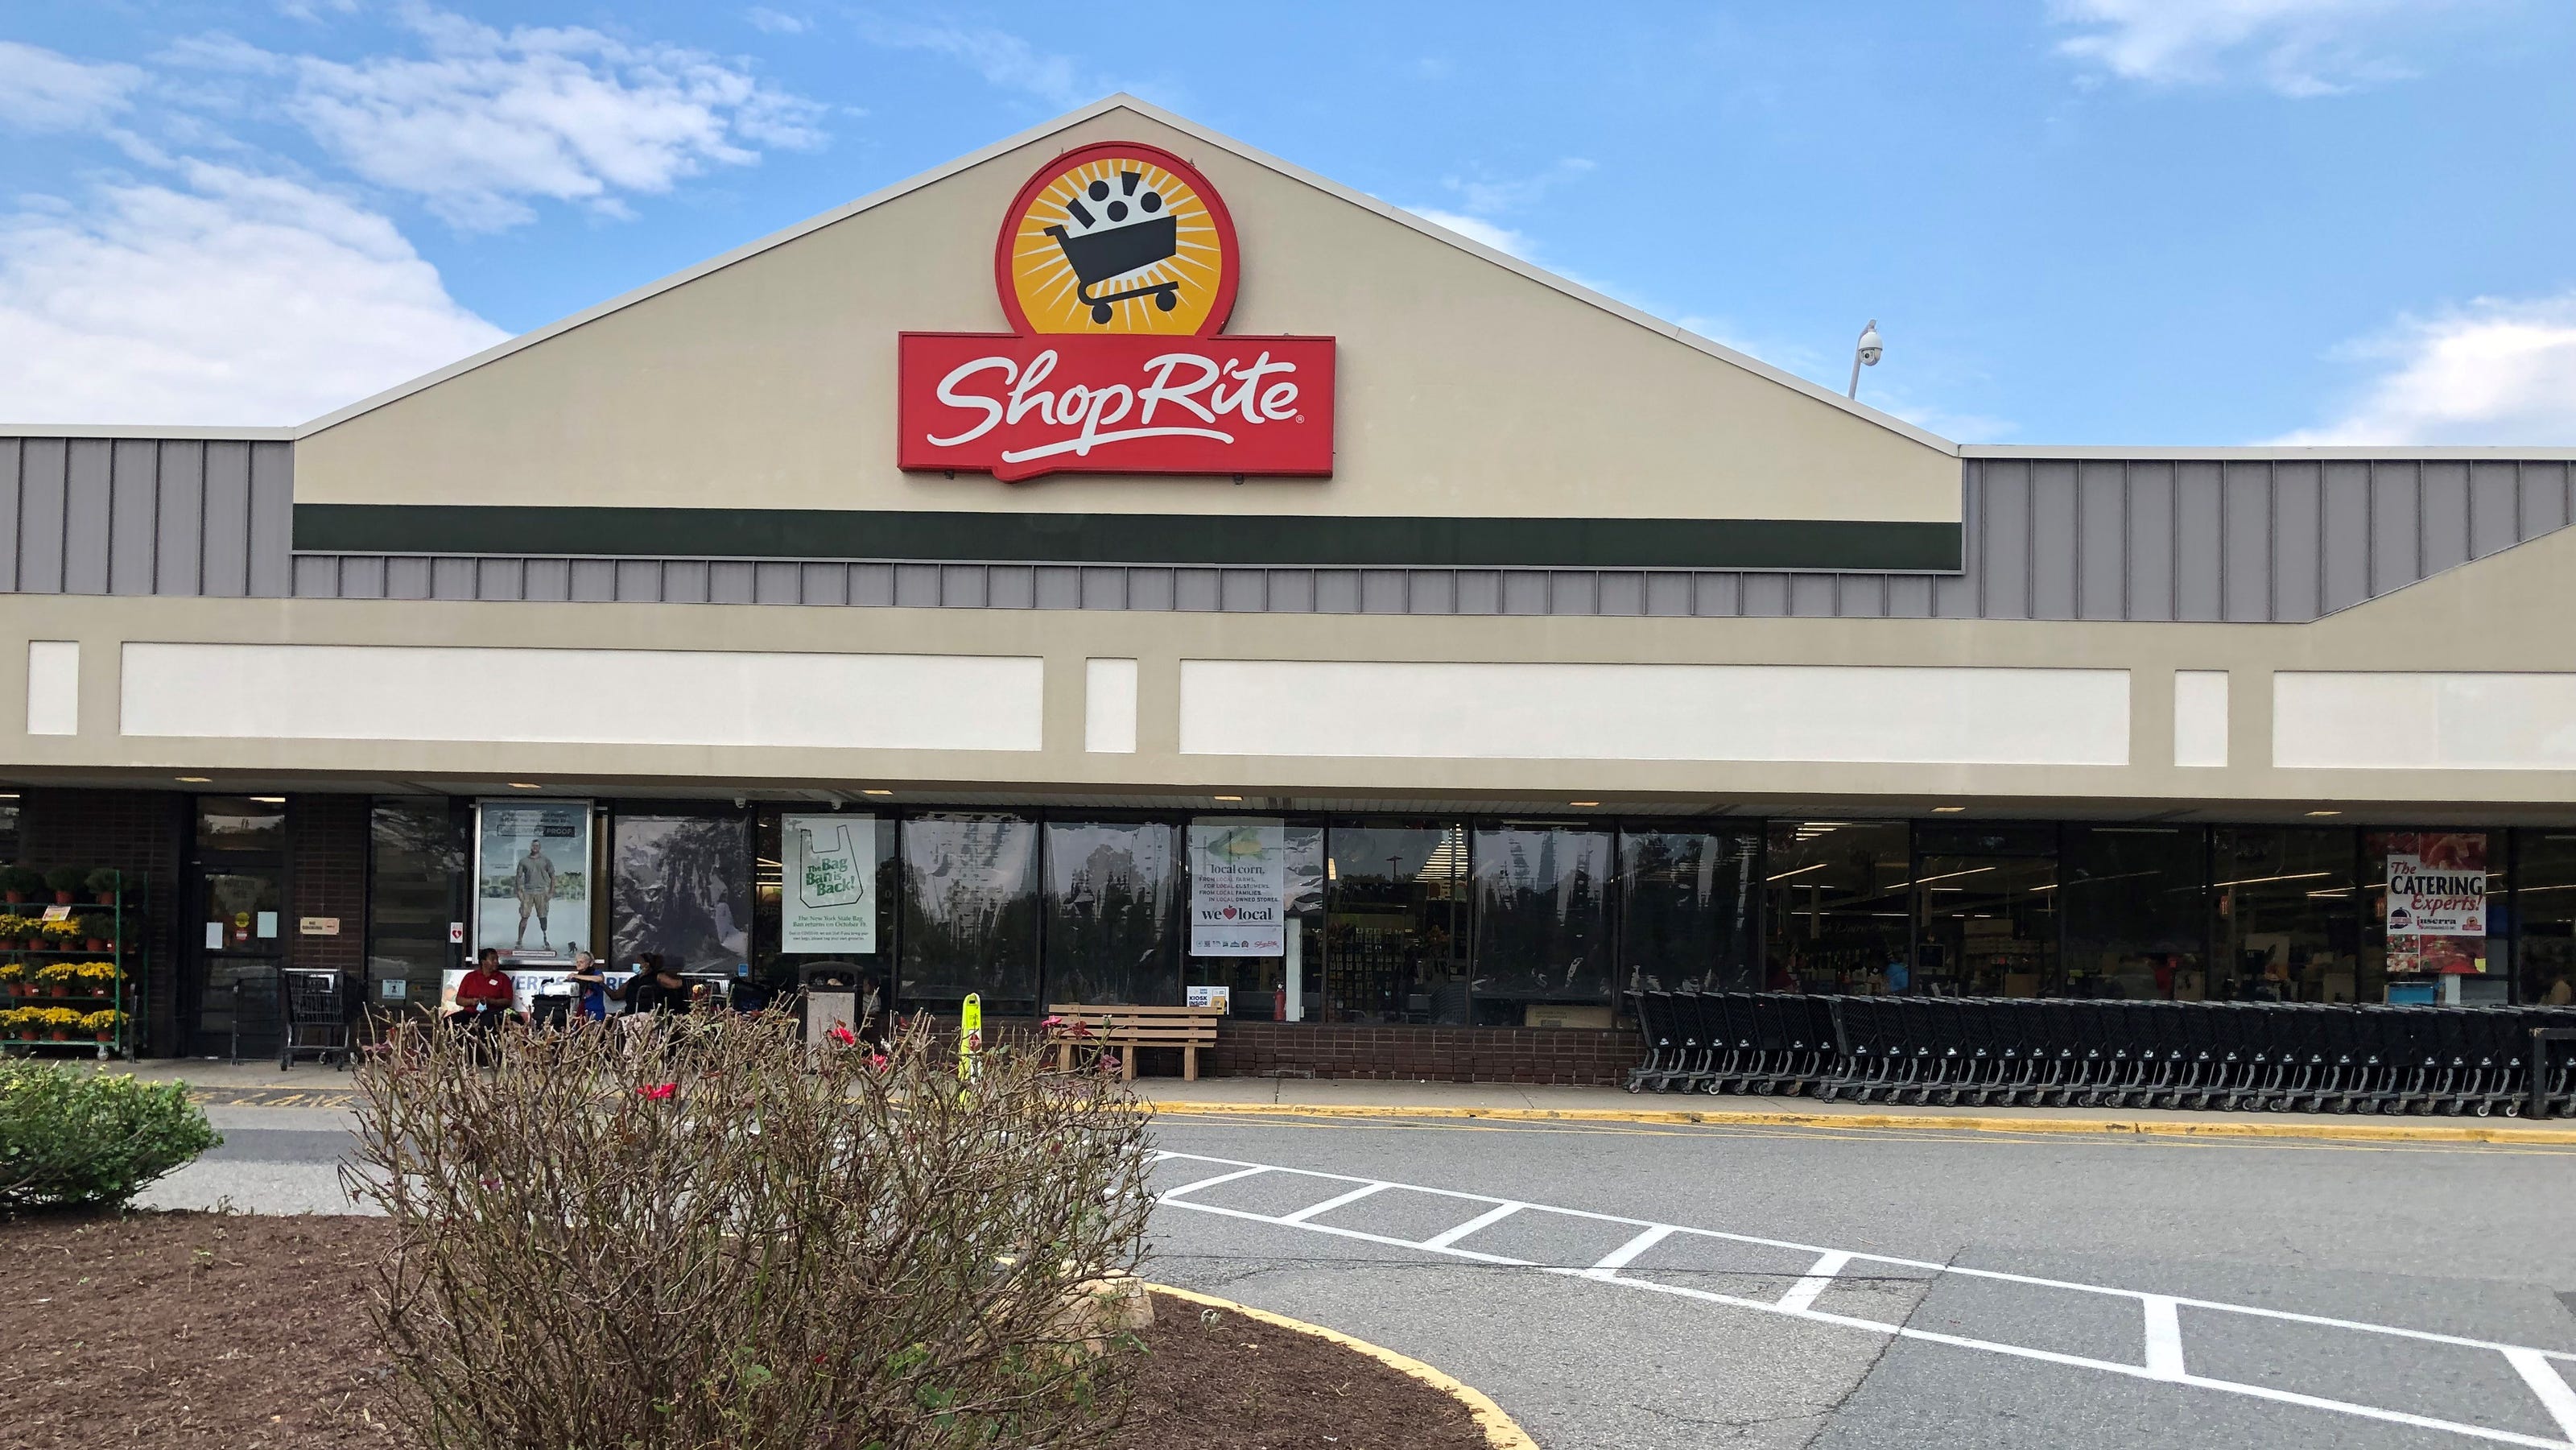 ShopRite Weekly Ad and Coupons in New York and the surrounding area - wide 8